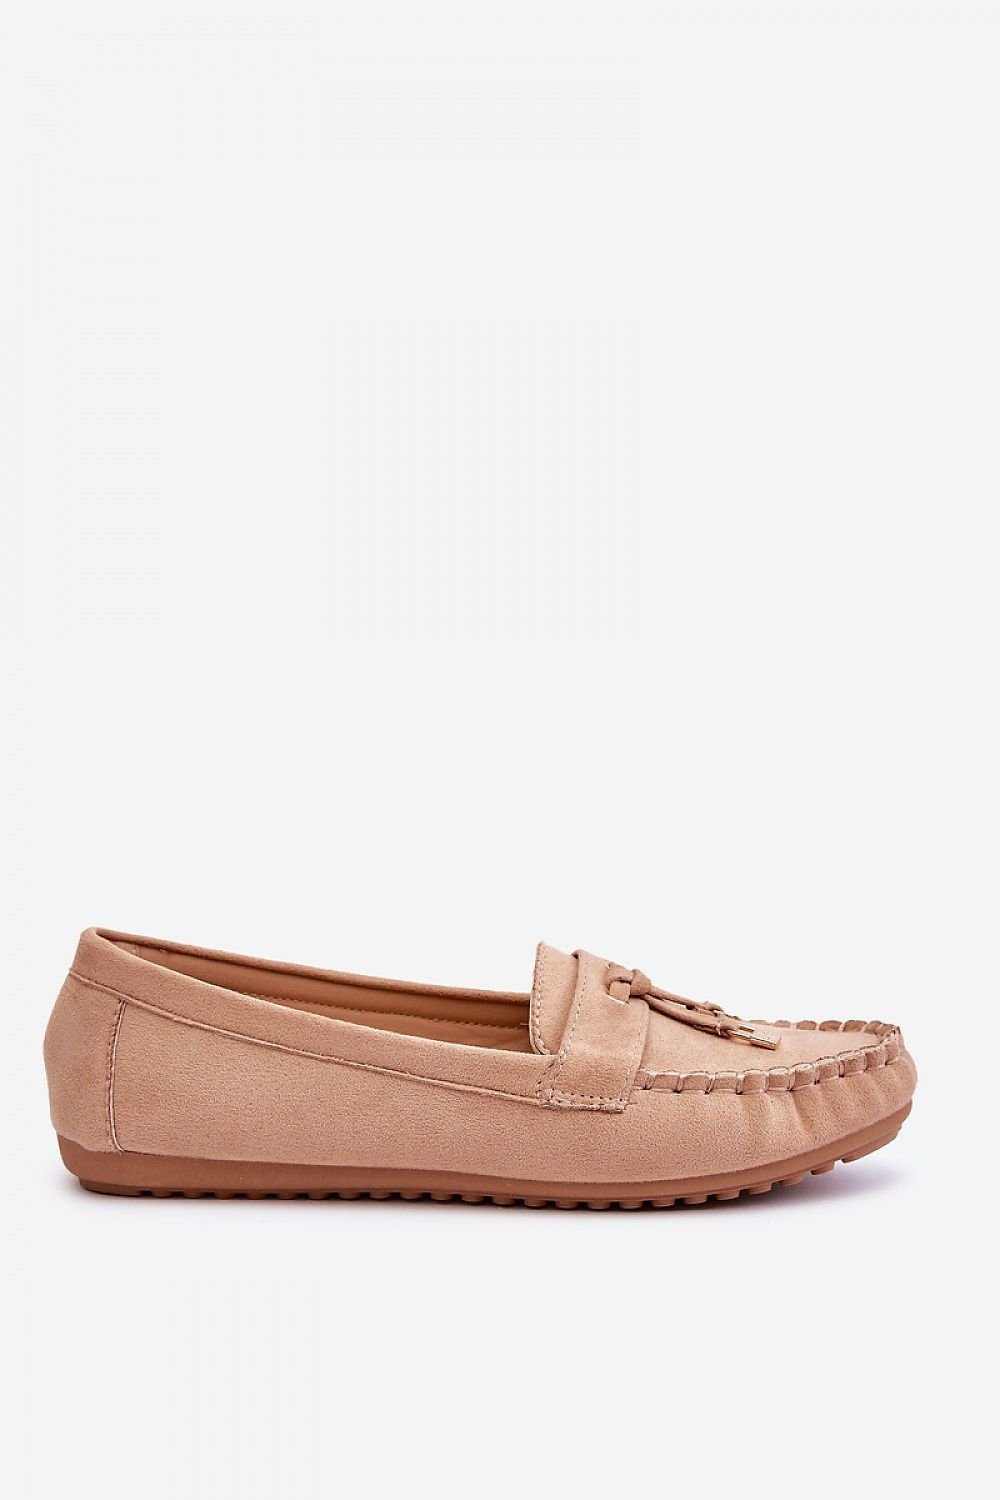 Women's Blakely Eco-Suede Moccasins - Tan